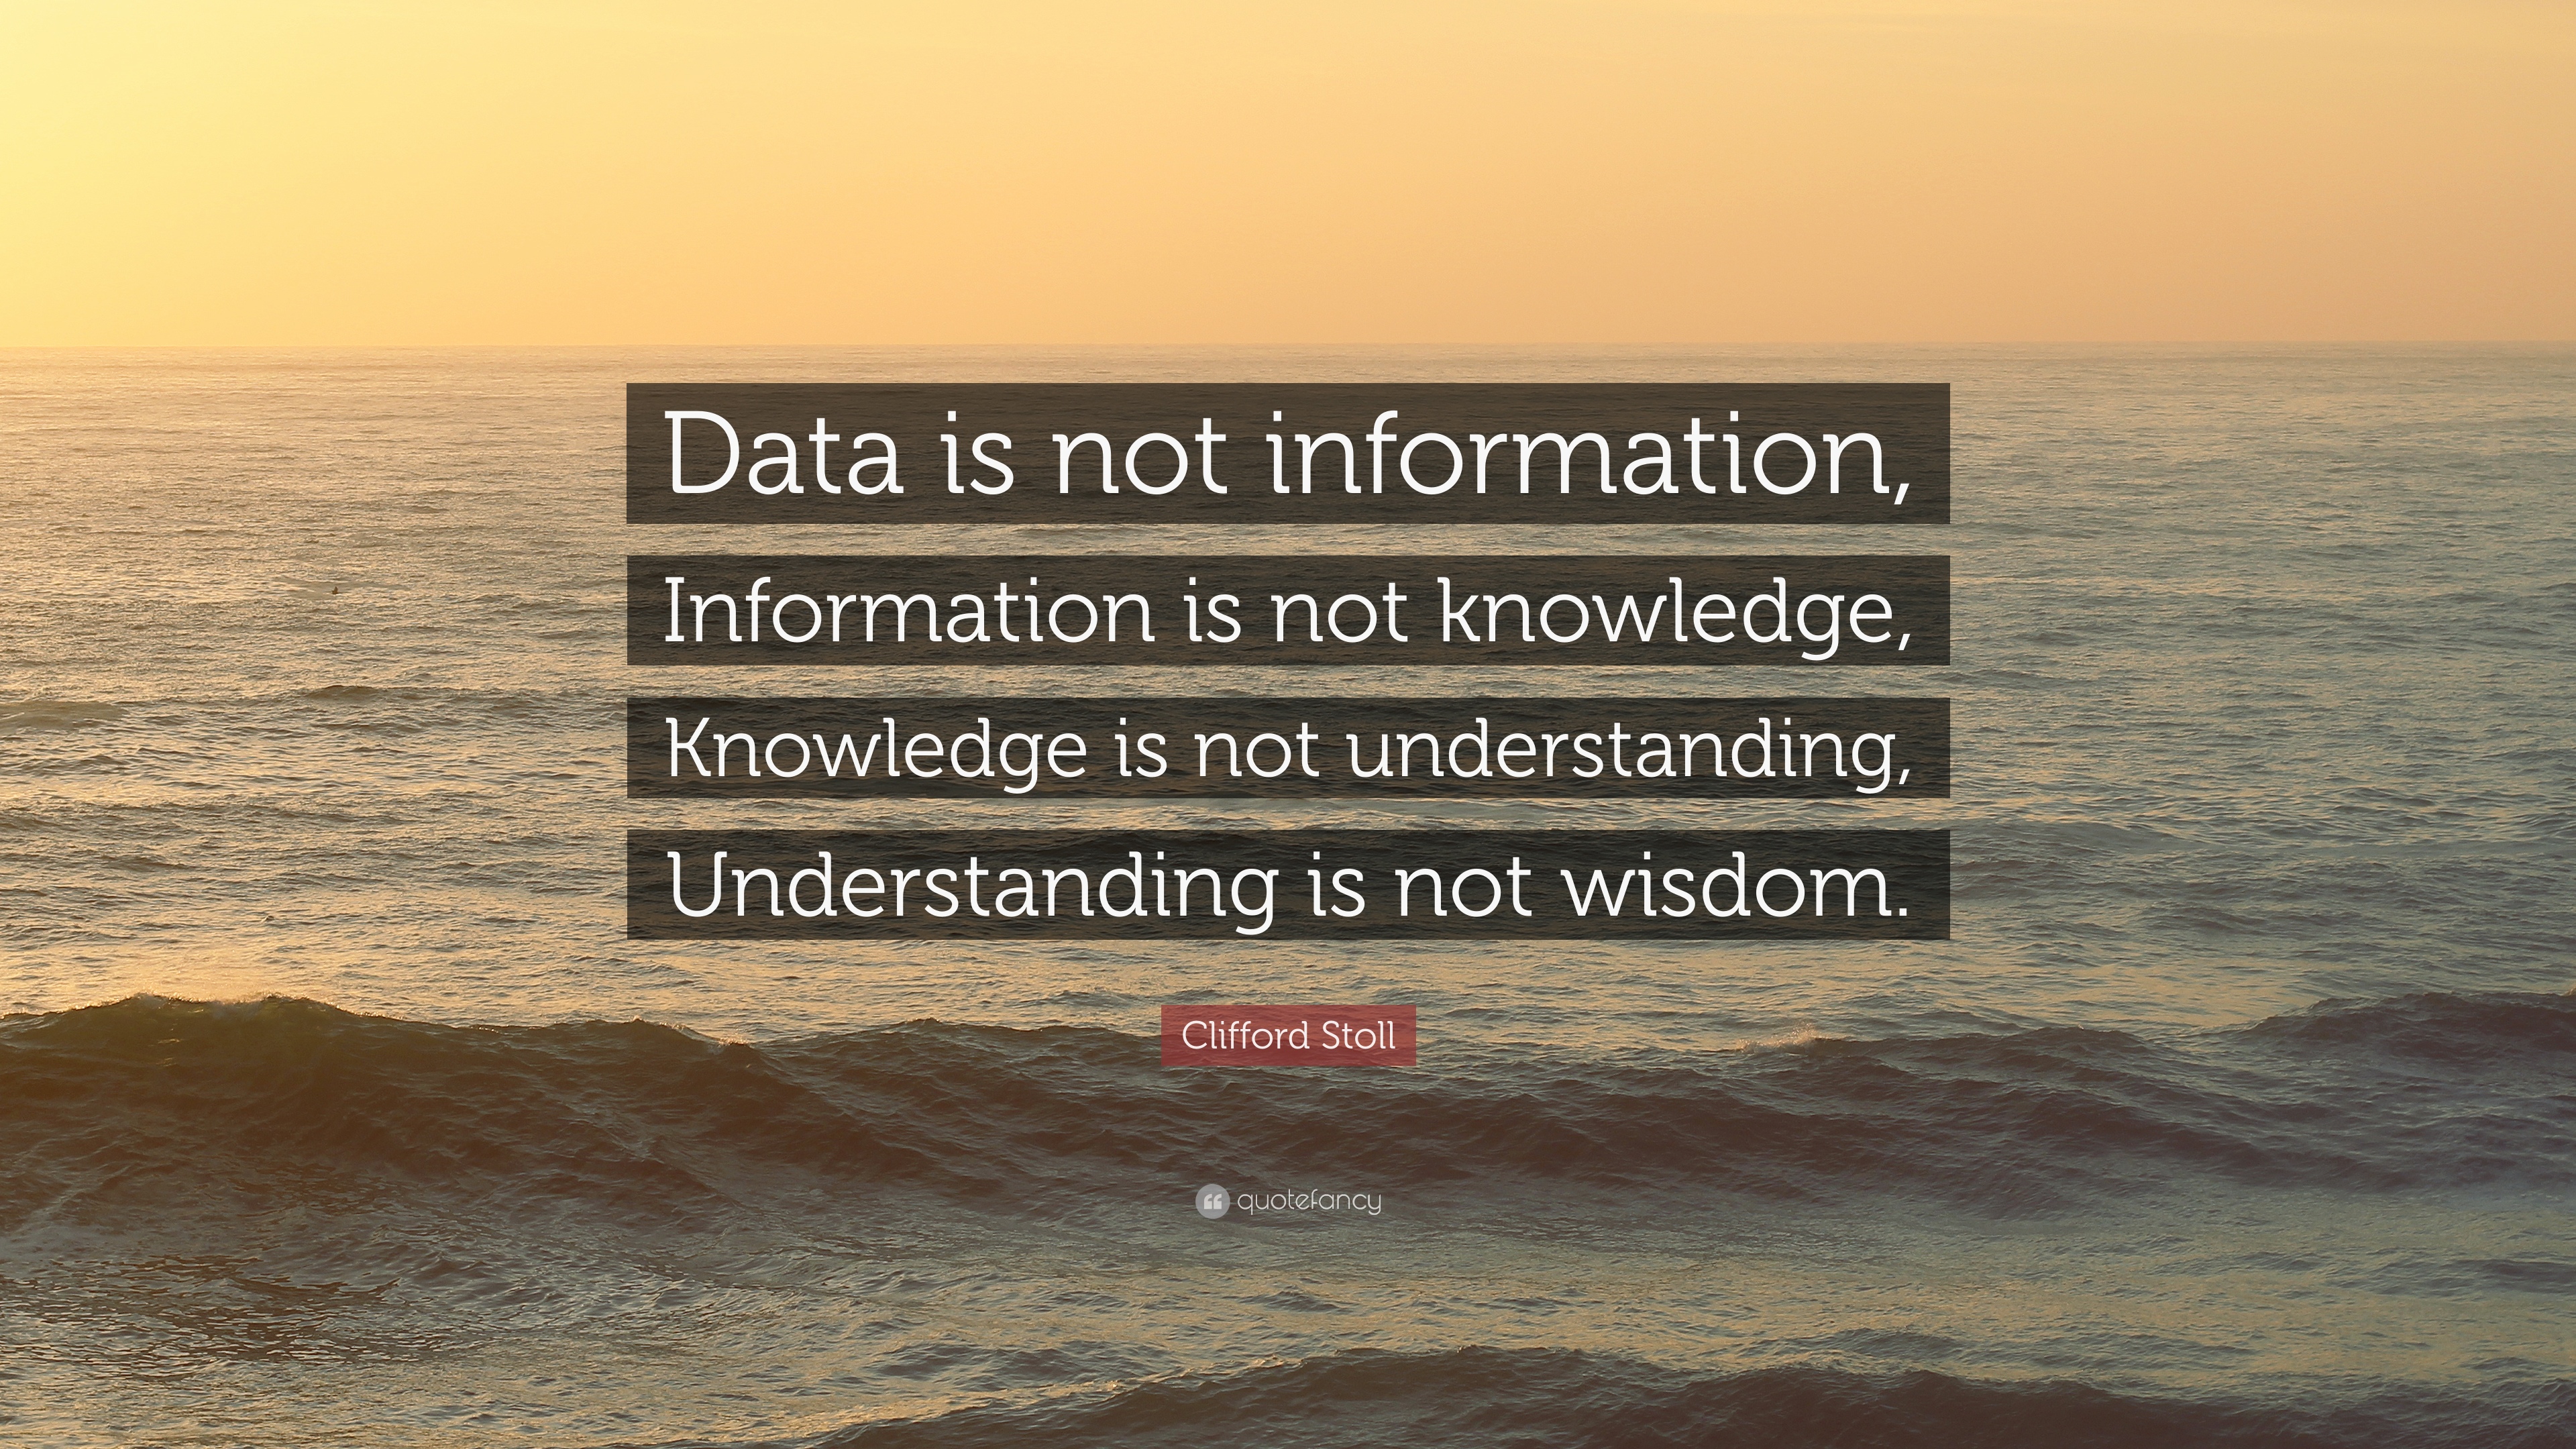 data_is_not_information_information_is_not_knowledge.jpg